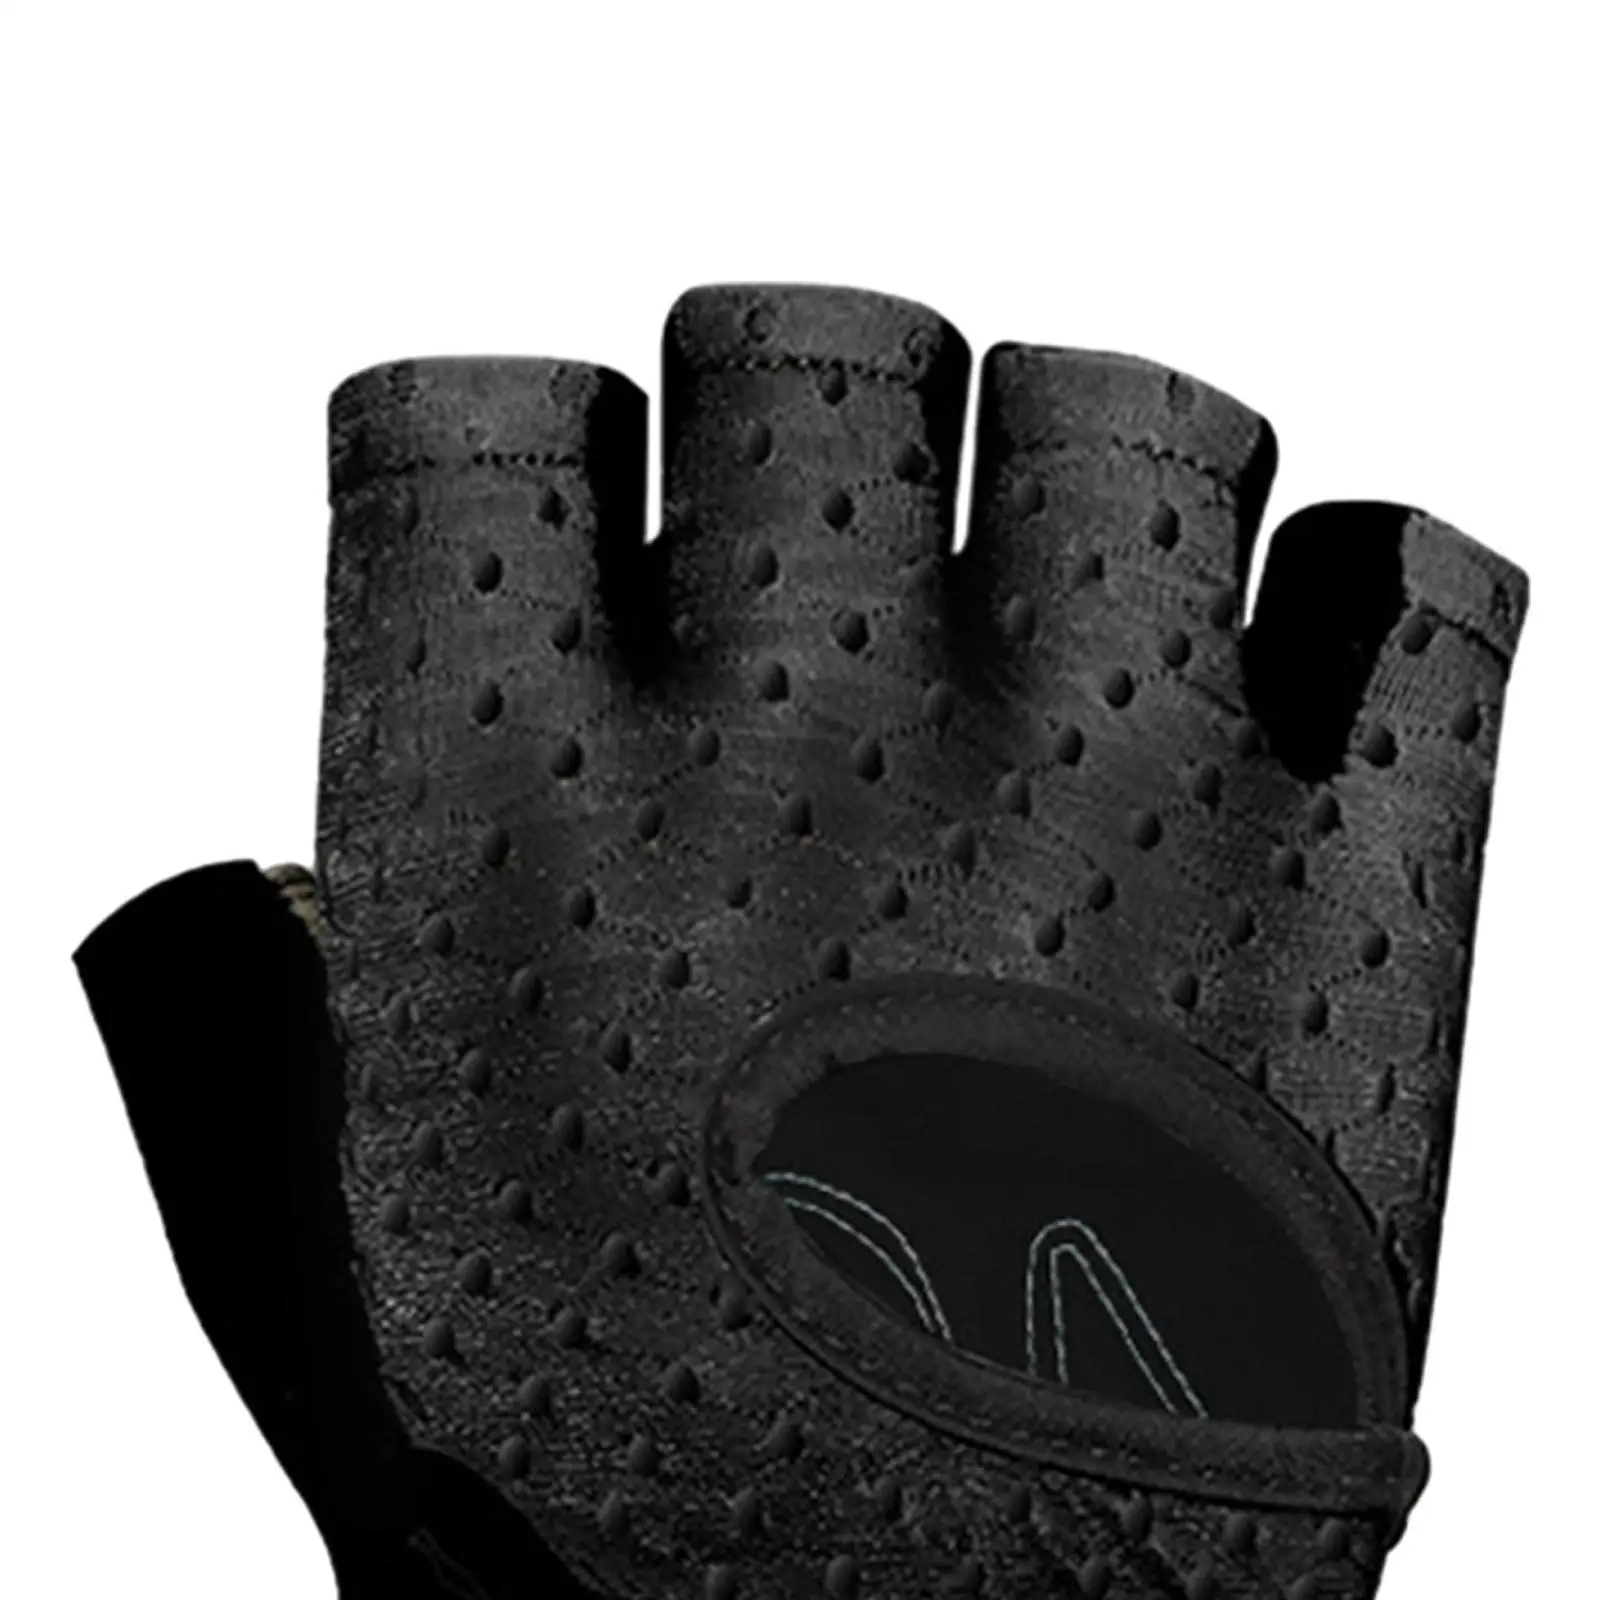 Half Finger Gloves Fitness Gloves Biking Gloves, Cycling Gloves, Weight Lifting Workout Gloves for Workout, Gym Camping